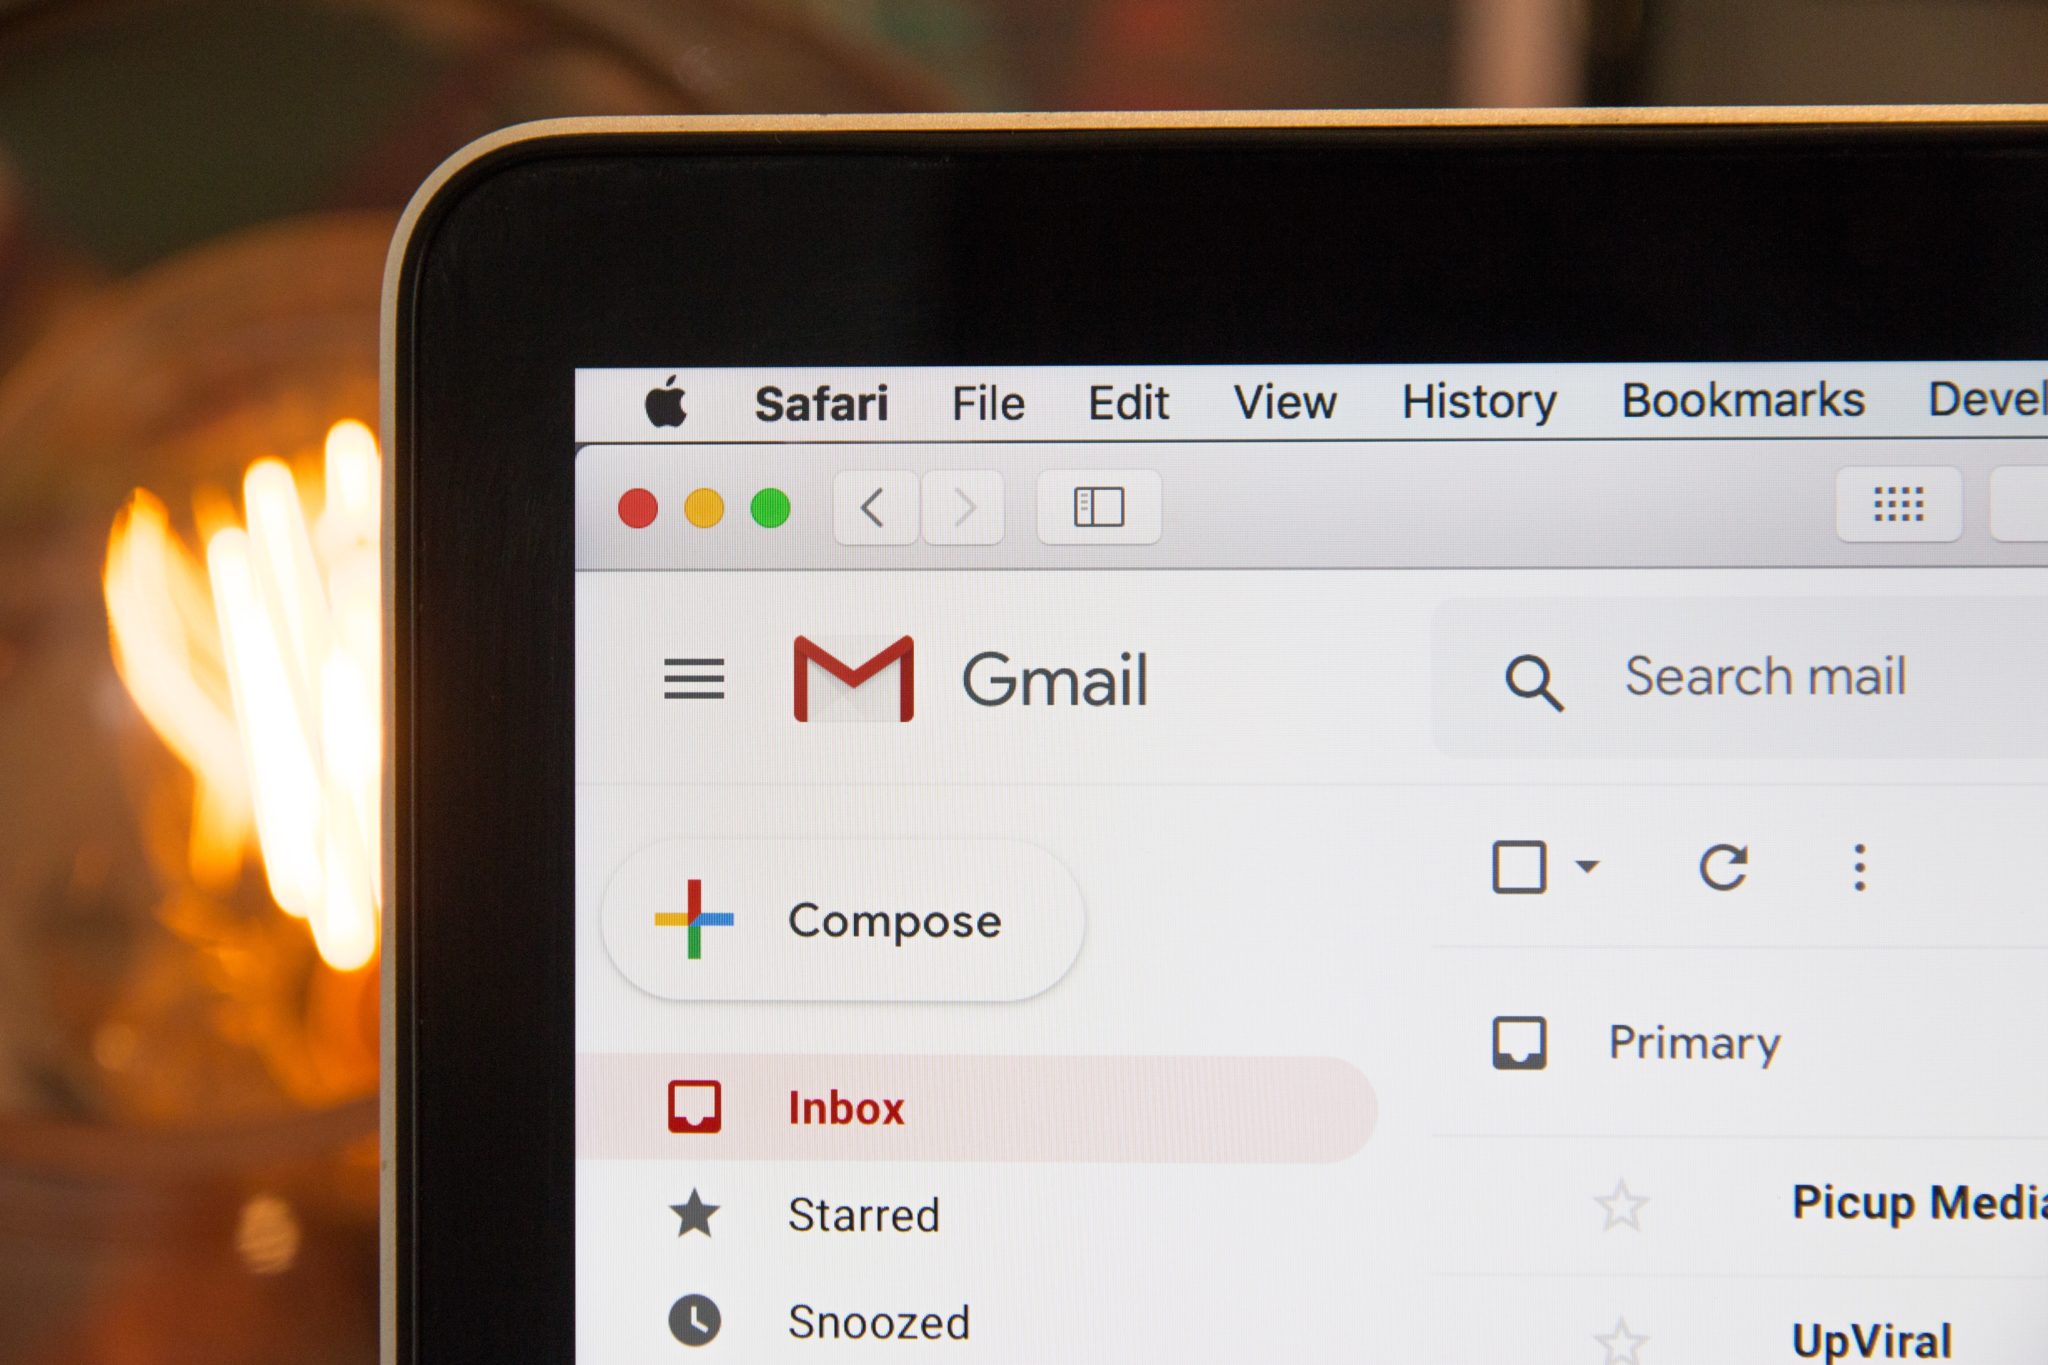 STOP THROWING UP IN EMAIL AND DO SIDEWAYS EMAILING